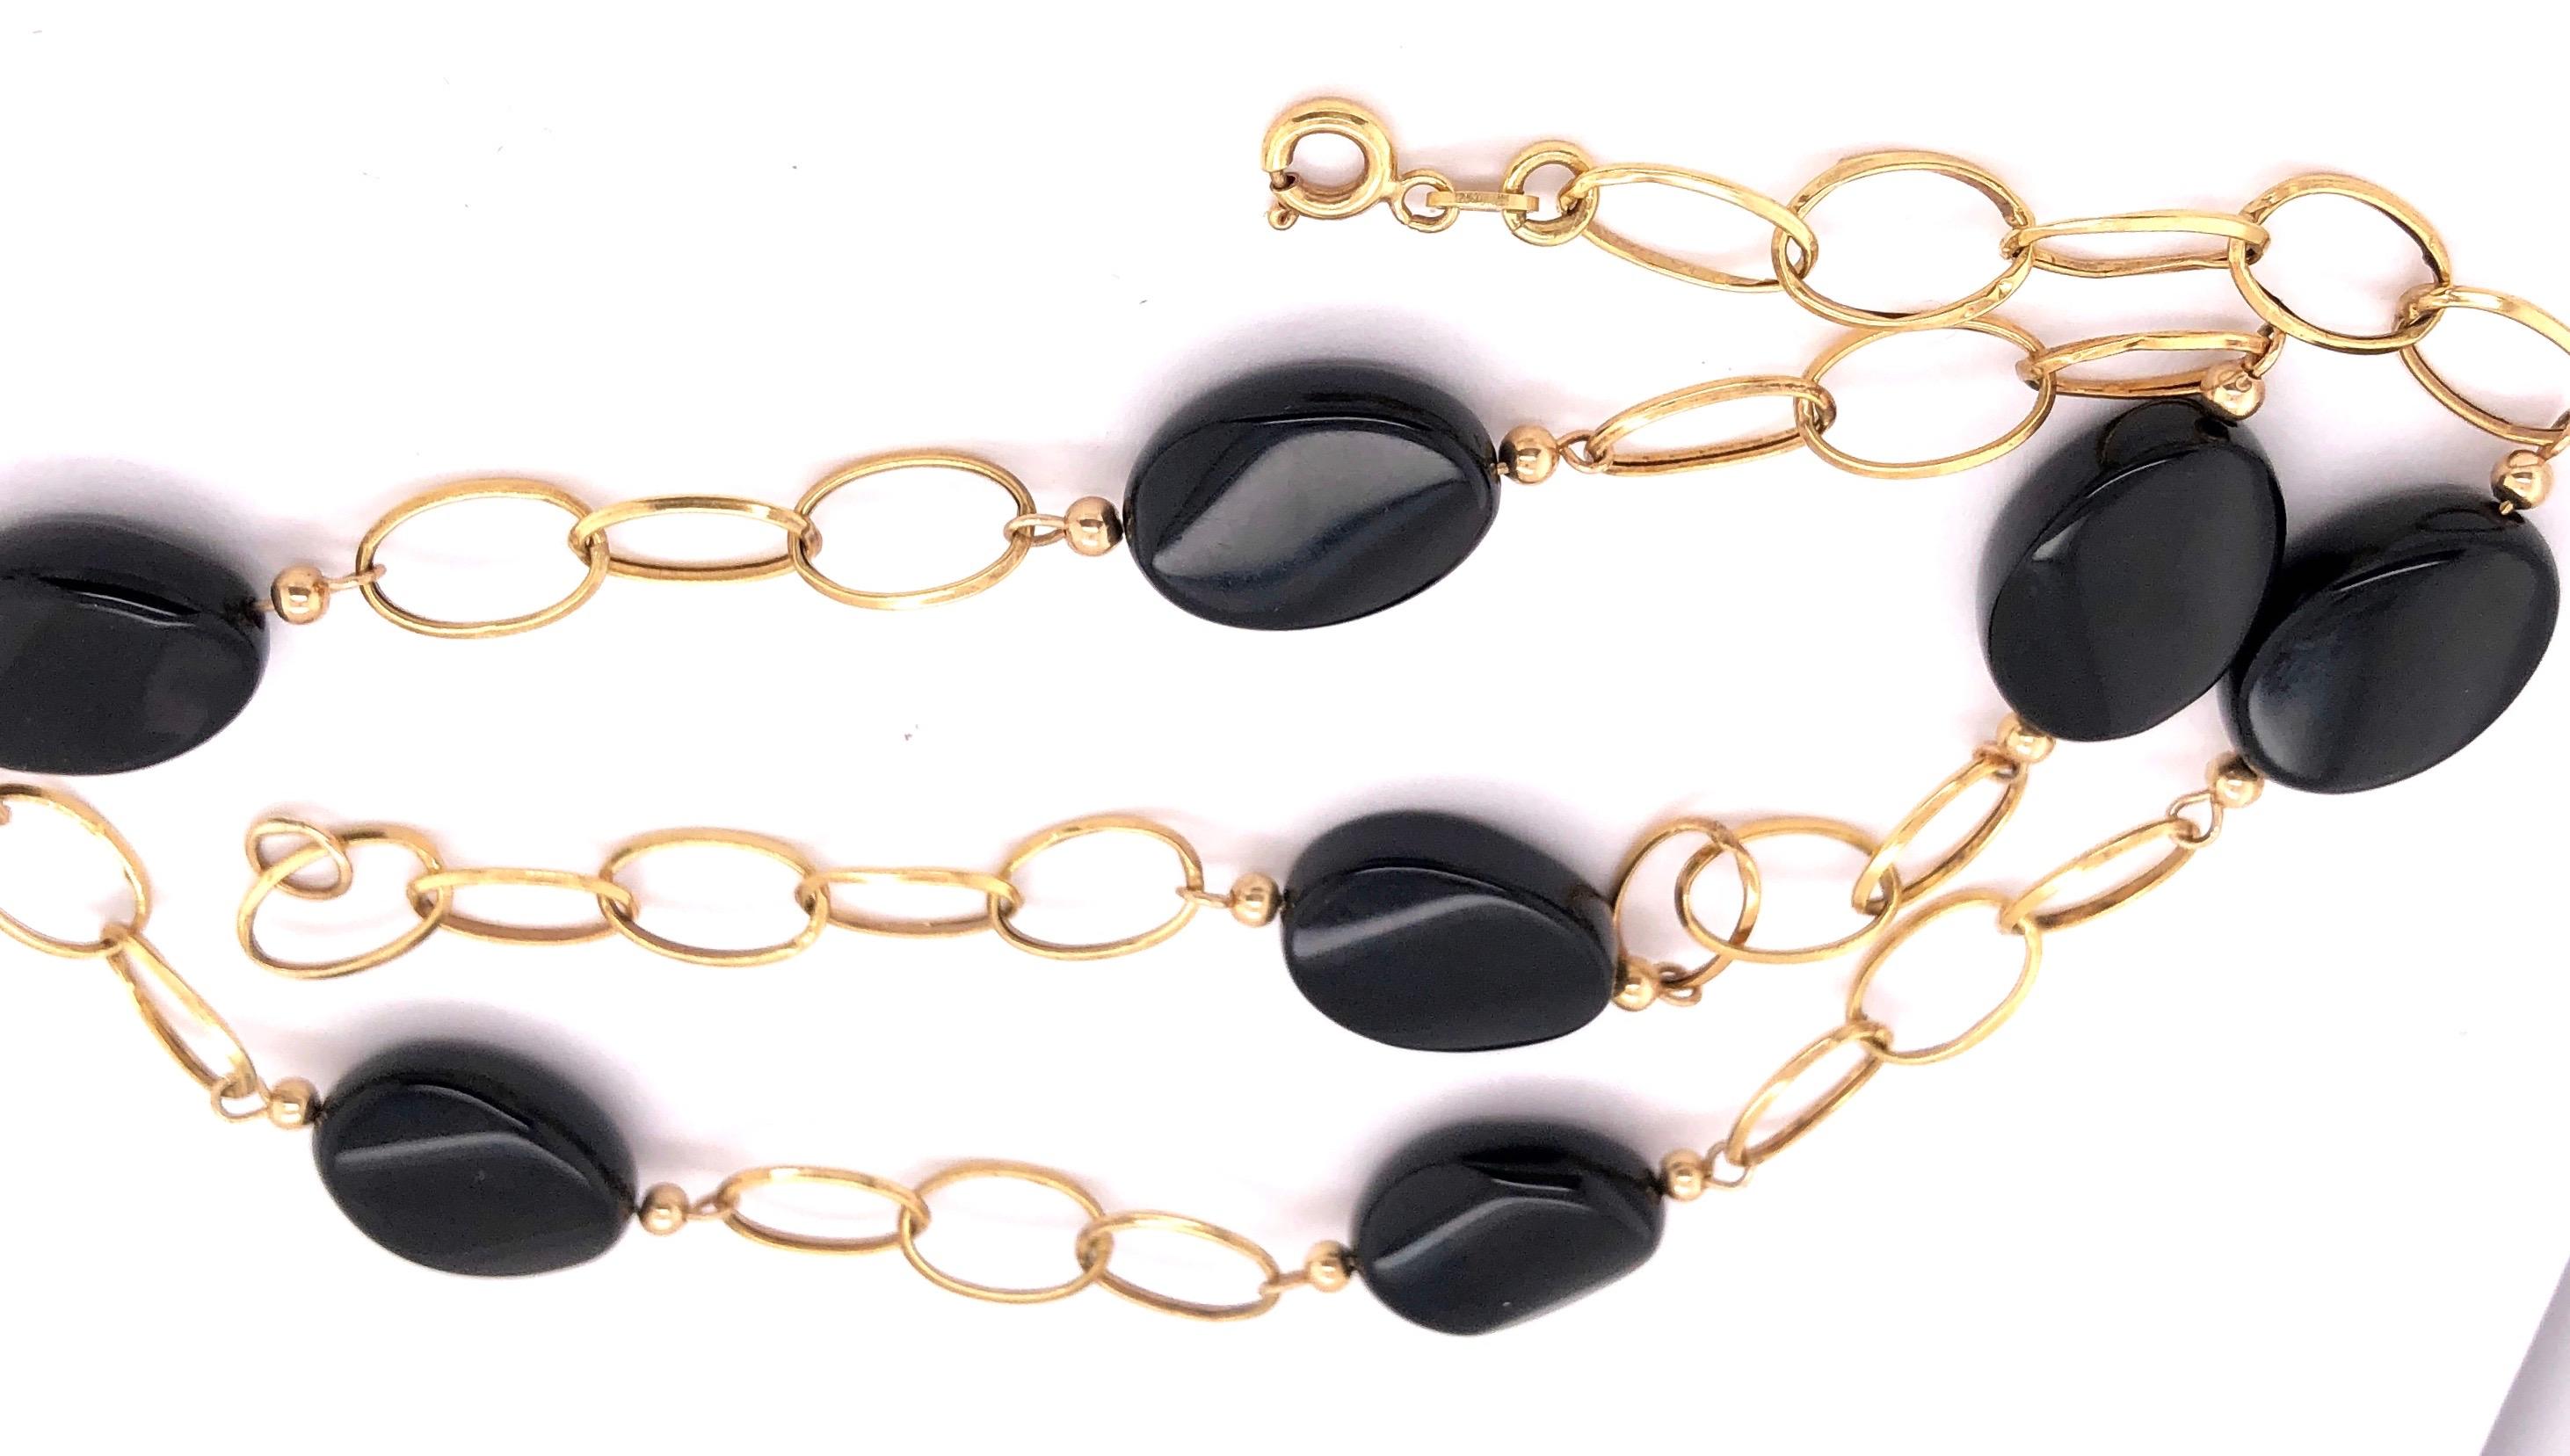 14 Karat Yellow Gold Link Necklace with Ebony Stones 21.2 Grams Total For Sale 11